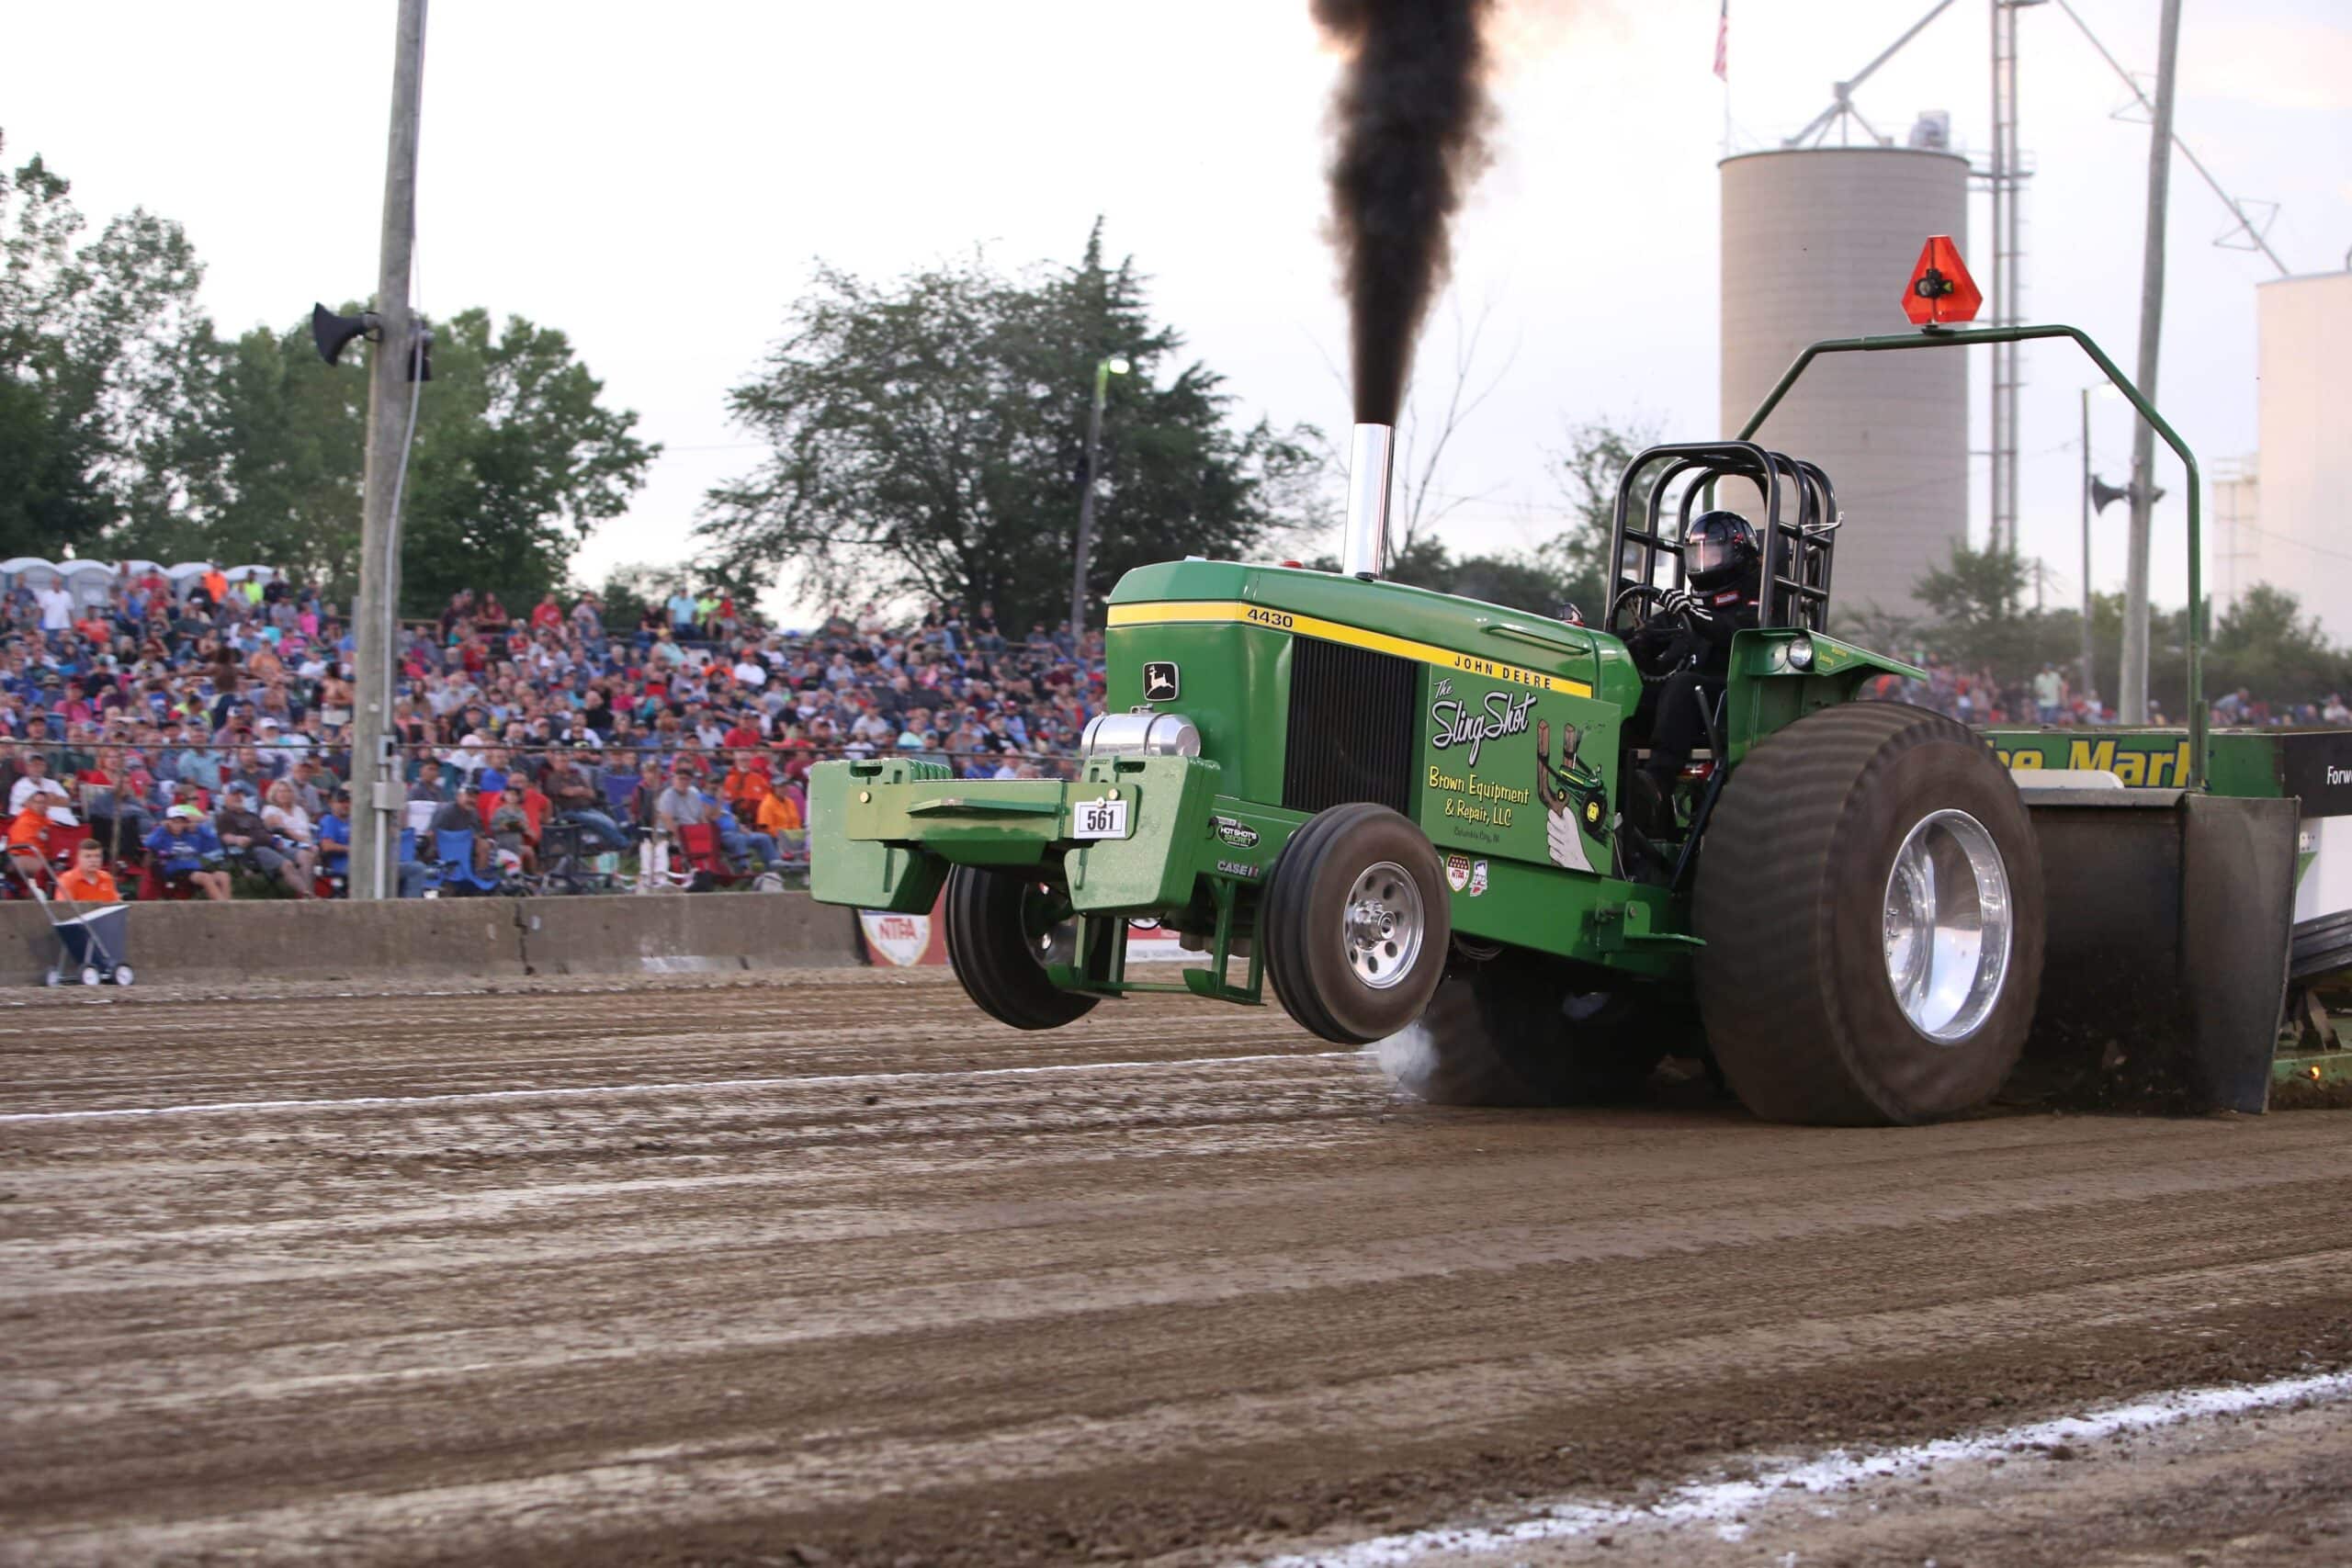 Photograph by NTPA of a John Deere tractor pulling down a dirt track in front of a grandstand audience.